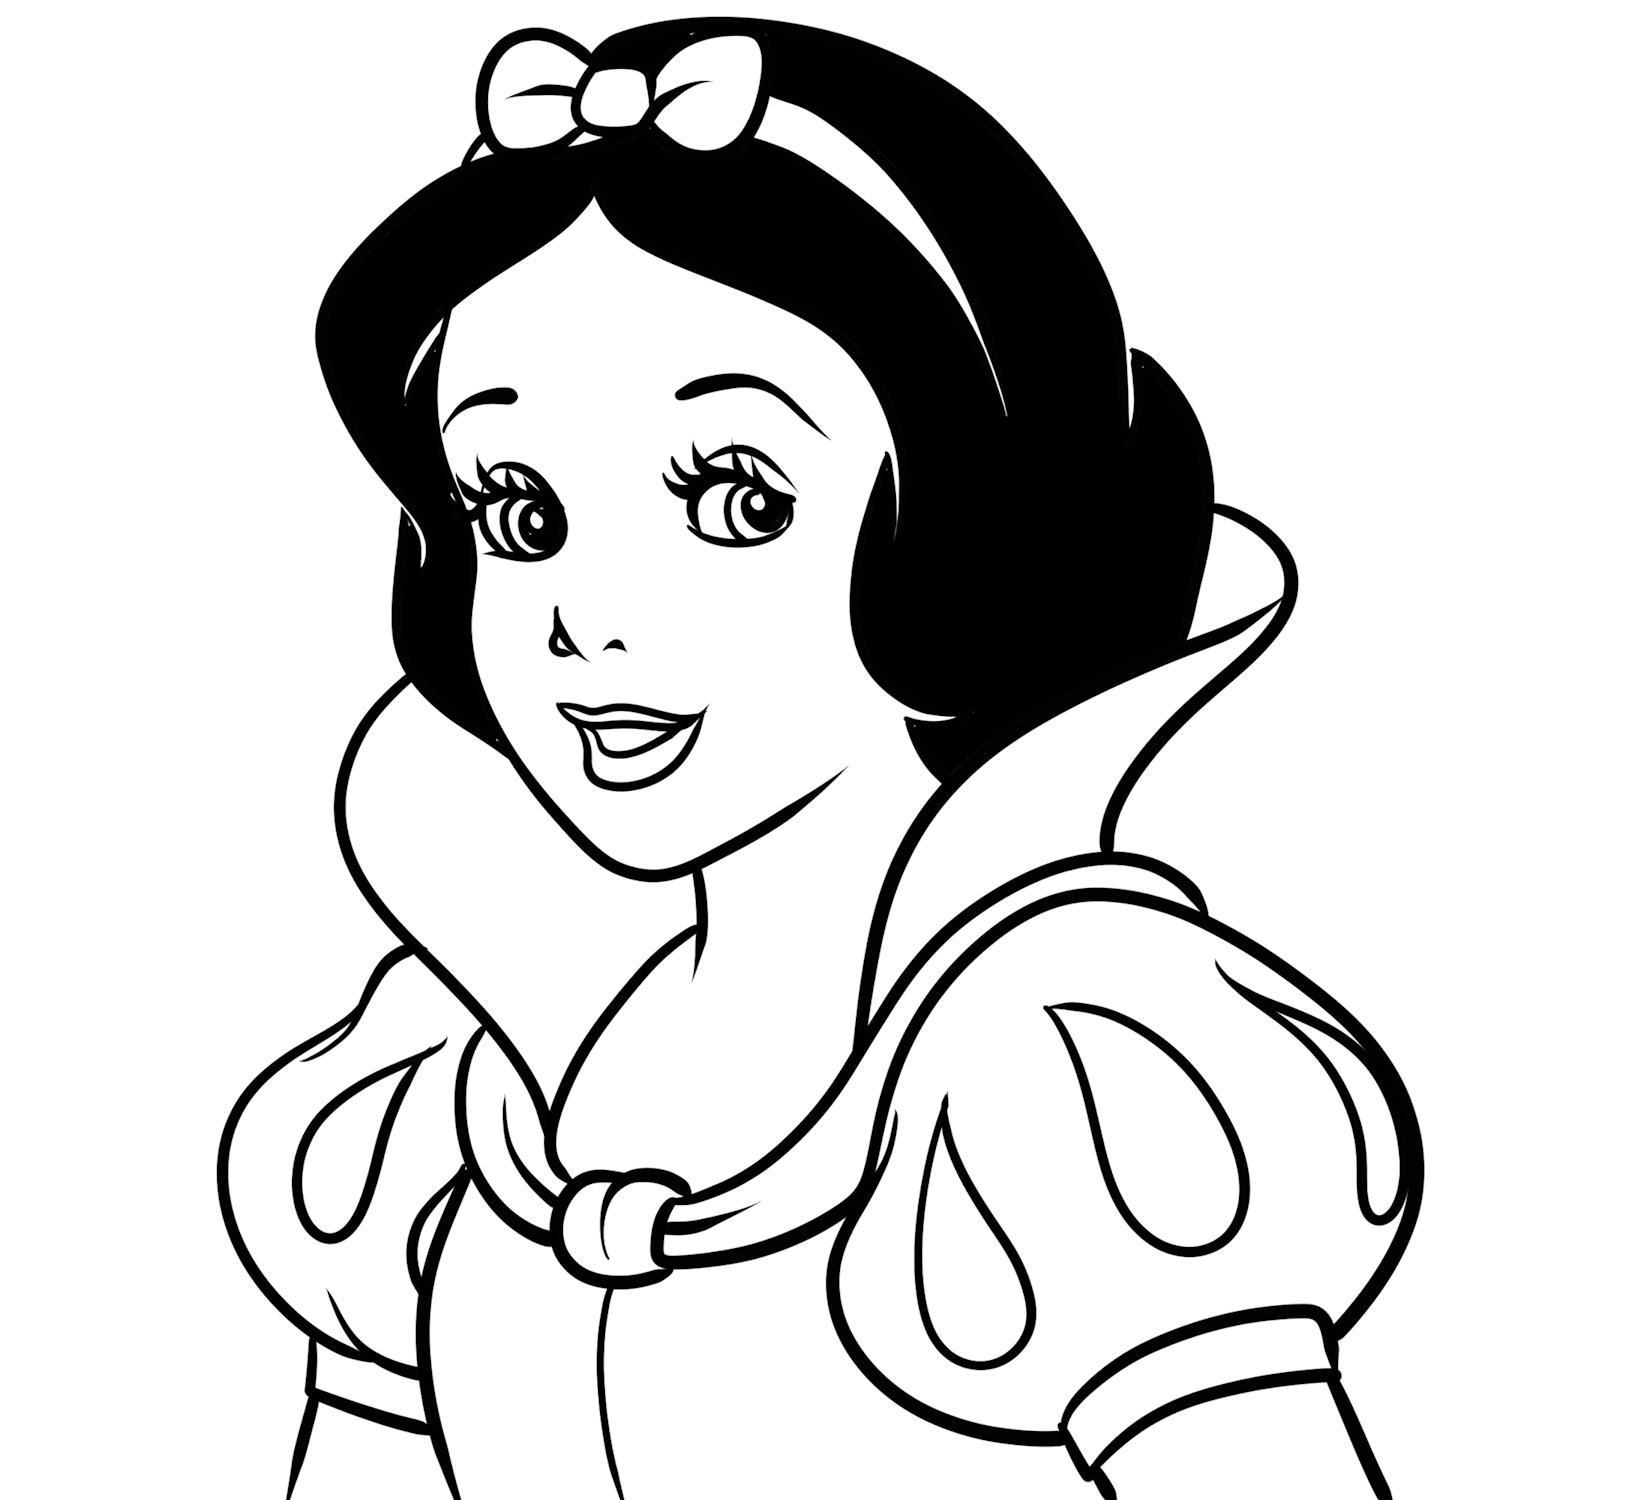  Snow White coloring page